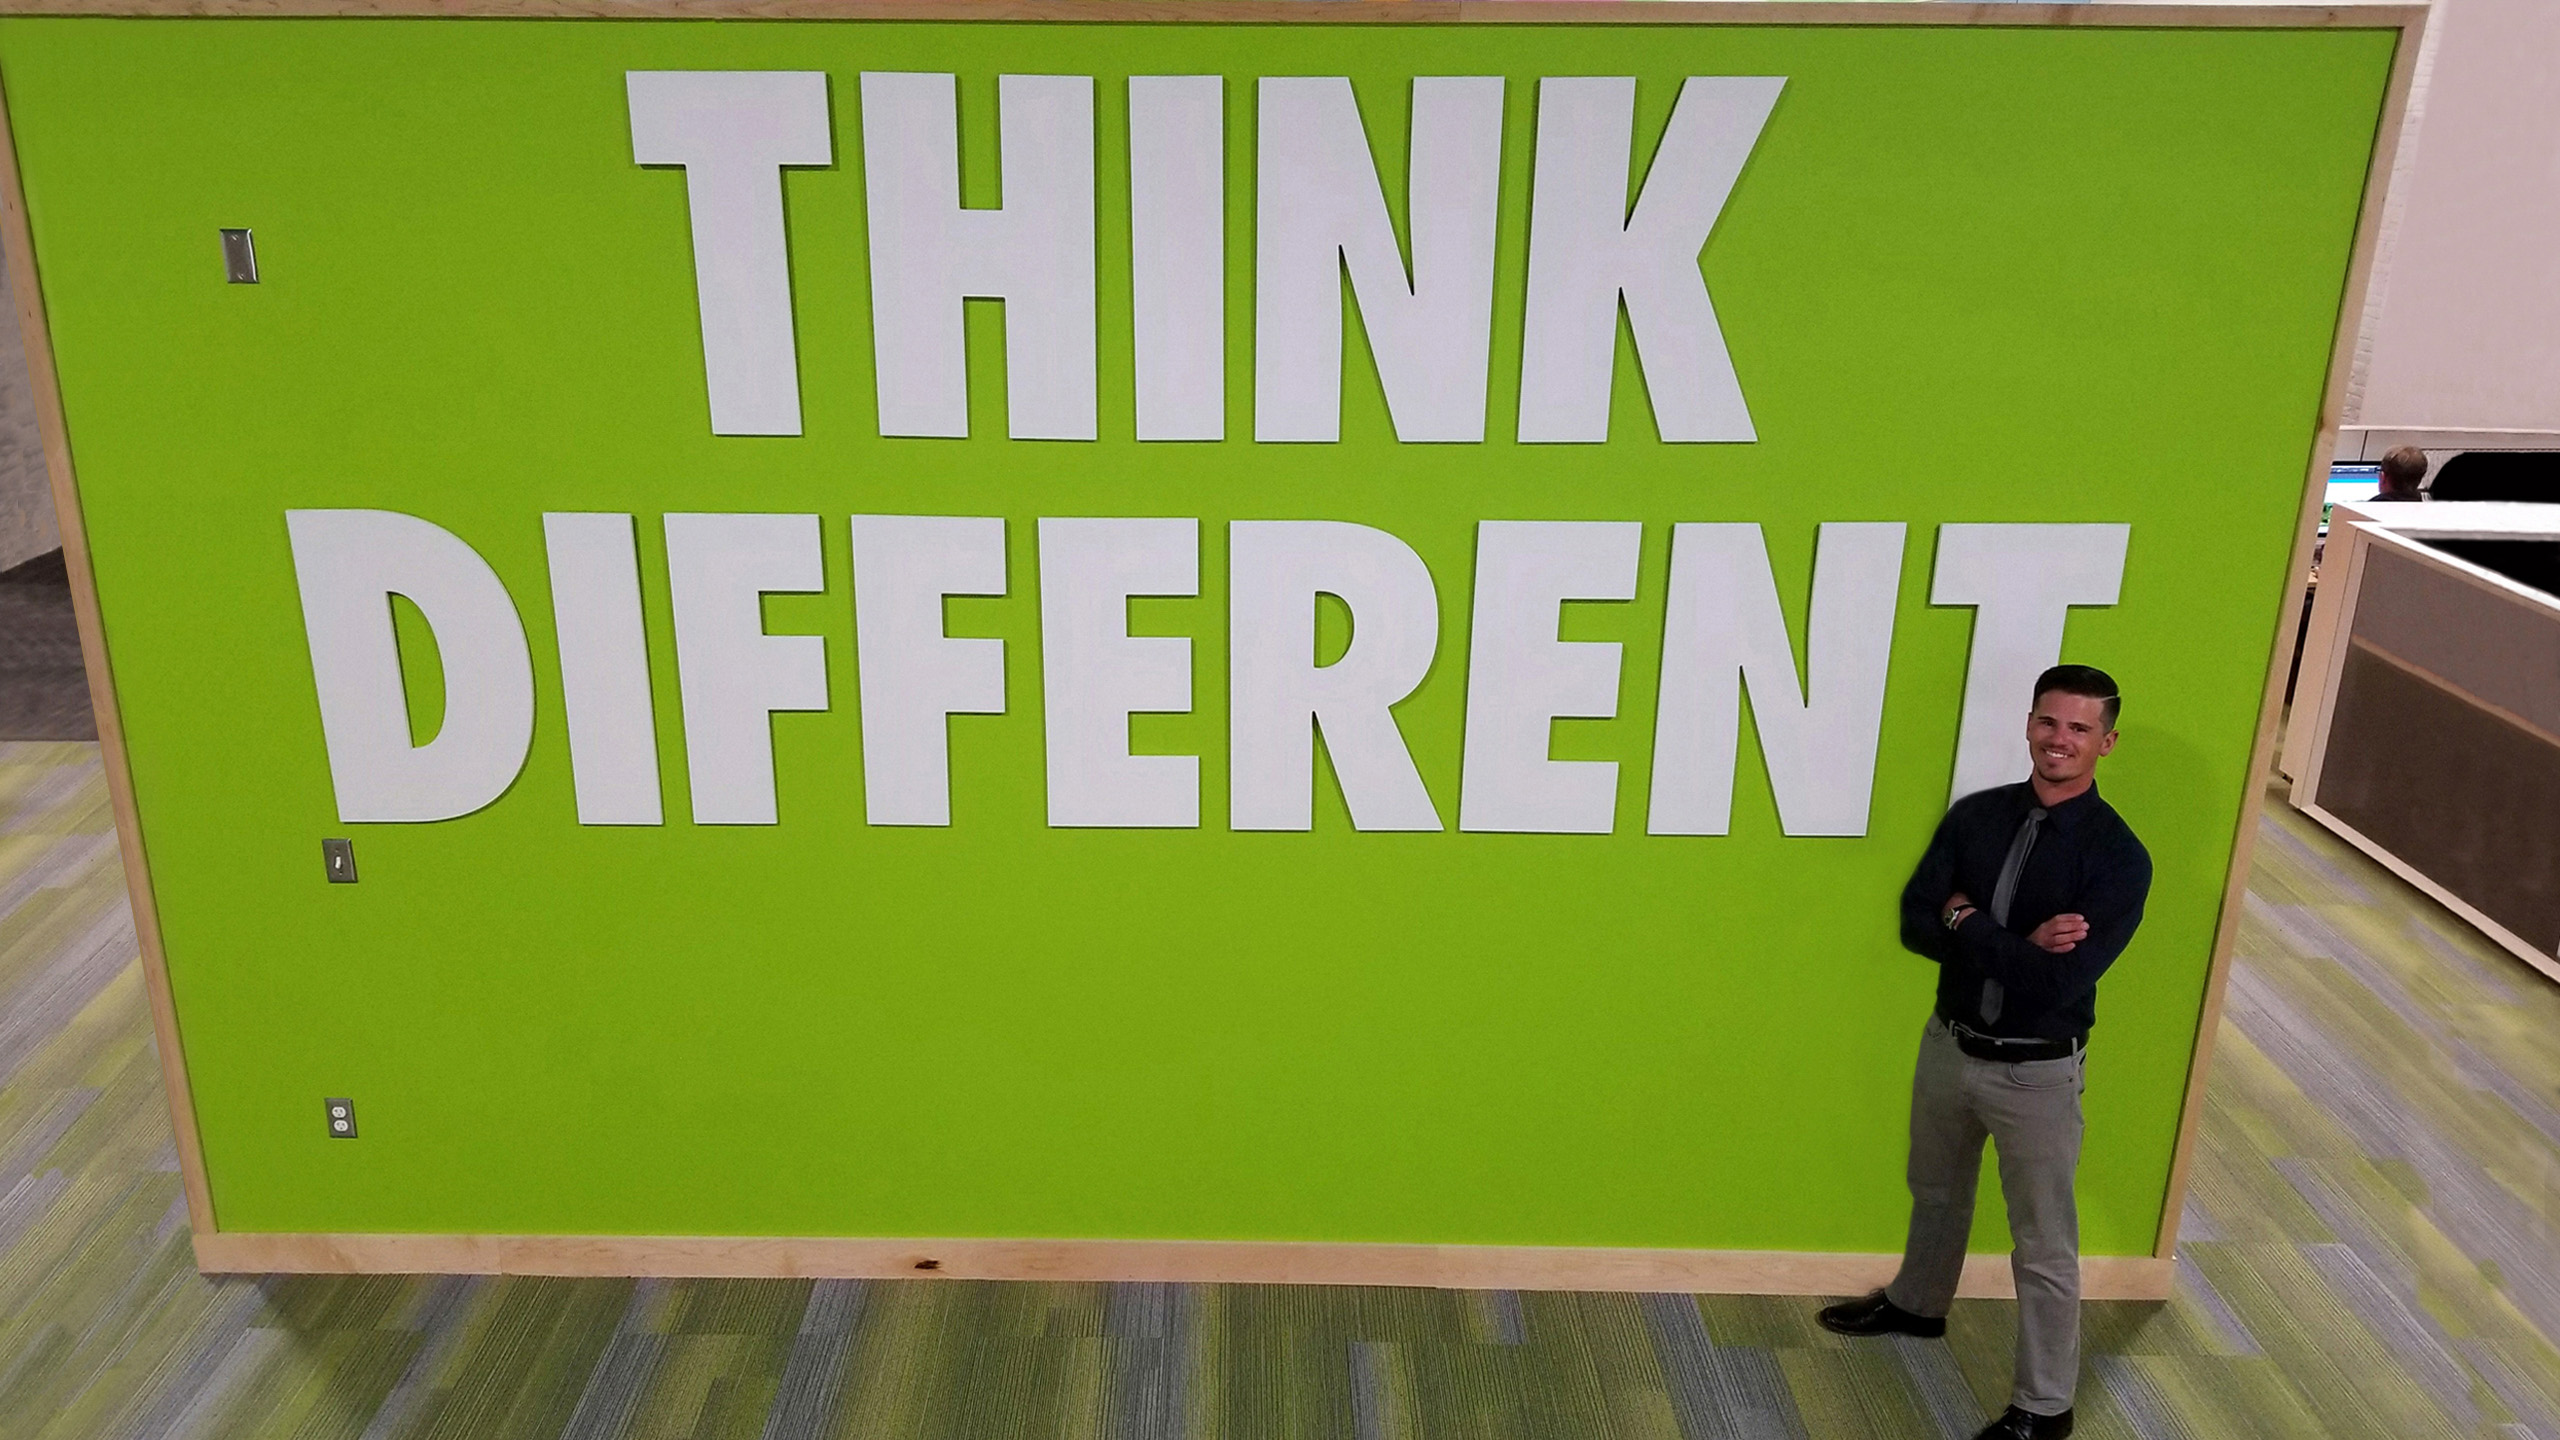 Eli Kohorst in front of "Think Different" sign 